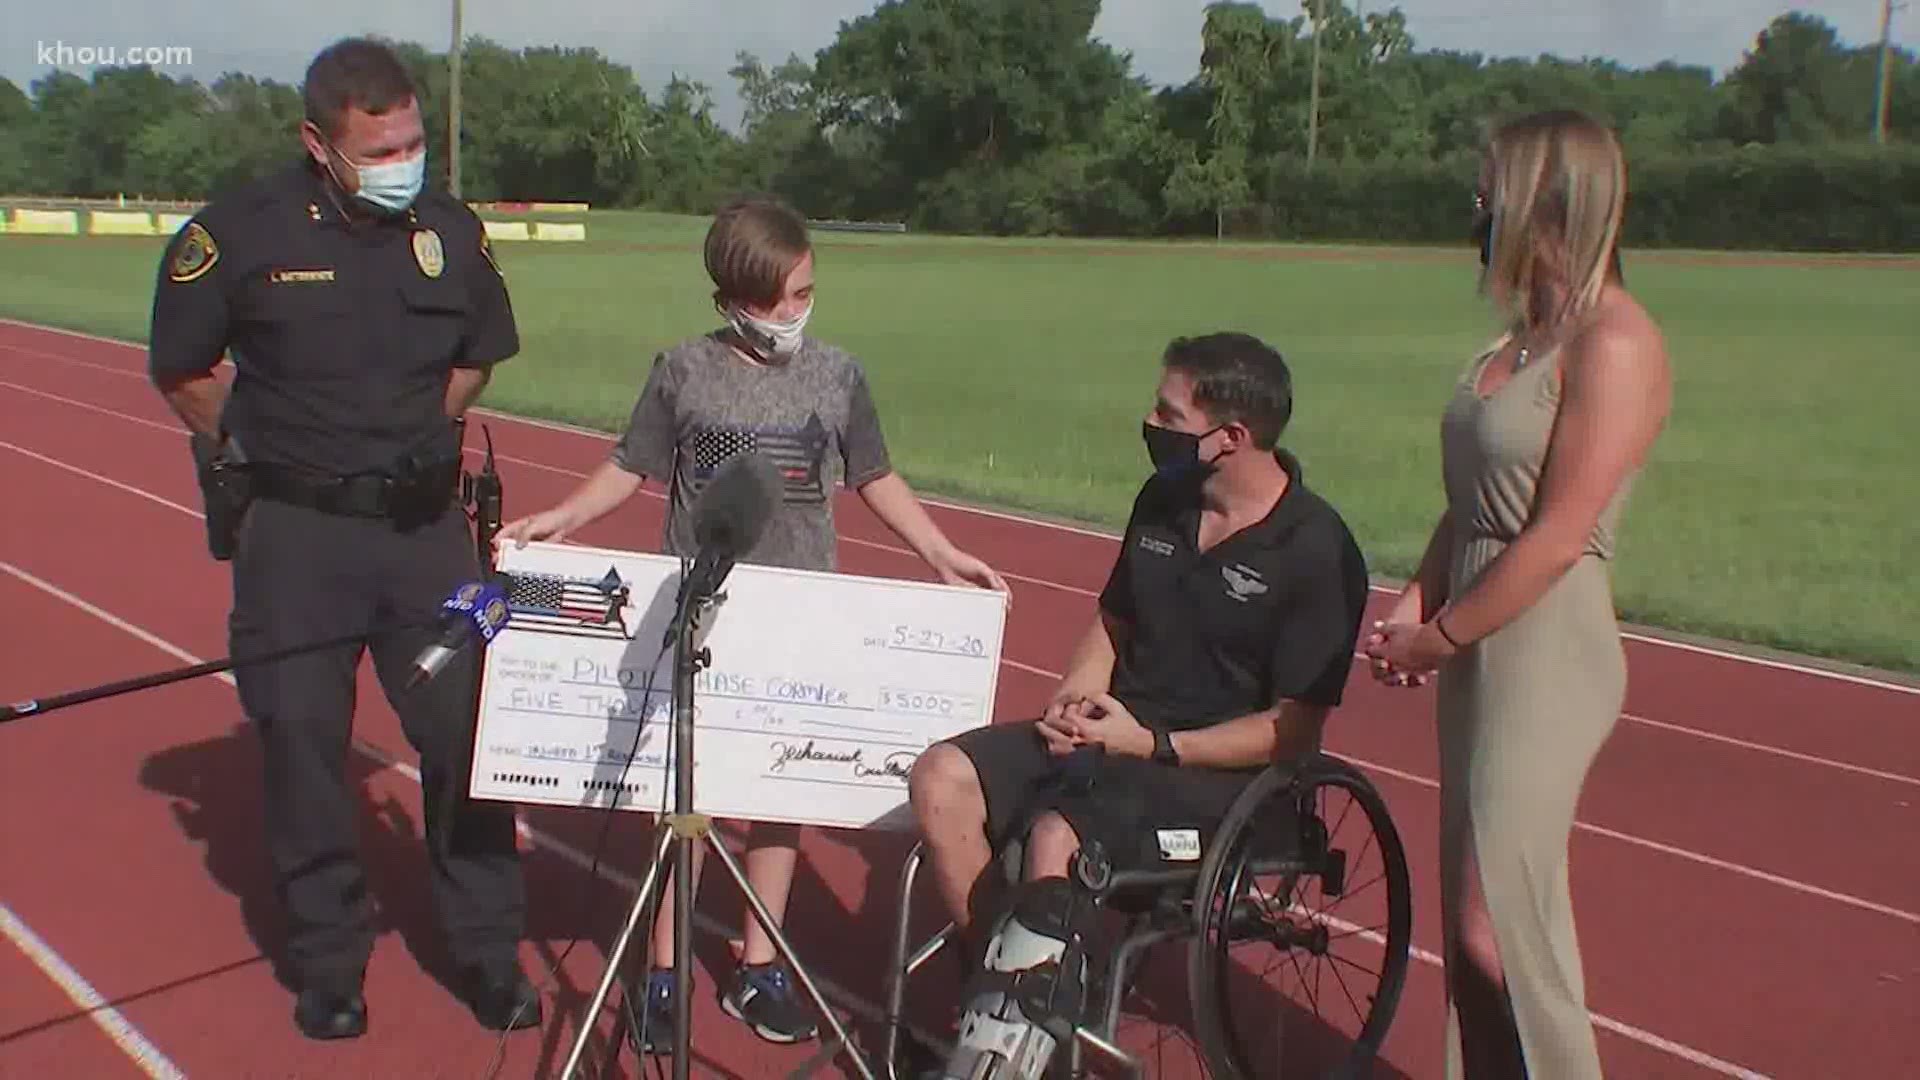 Police officer Chase Cormier was presented with a $5,000 check Saturday from Running 4 Heroes, a nonprofit organization created to raise money for first responders.